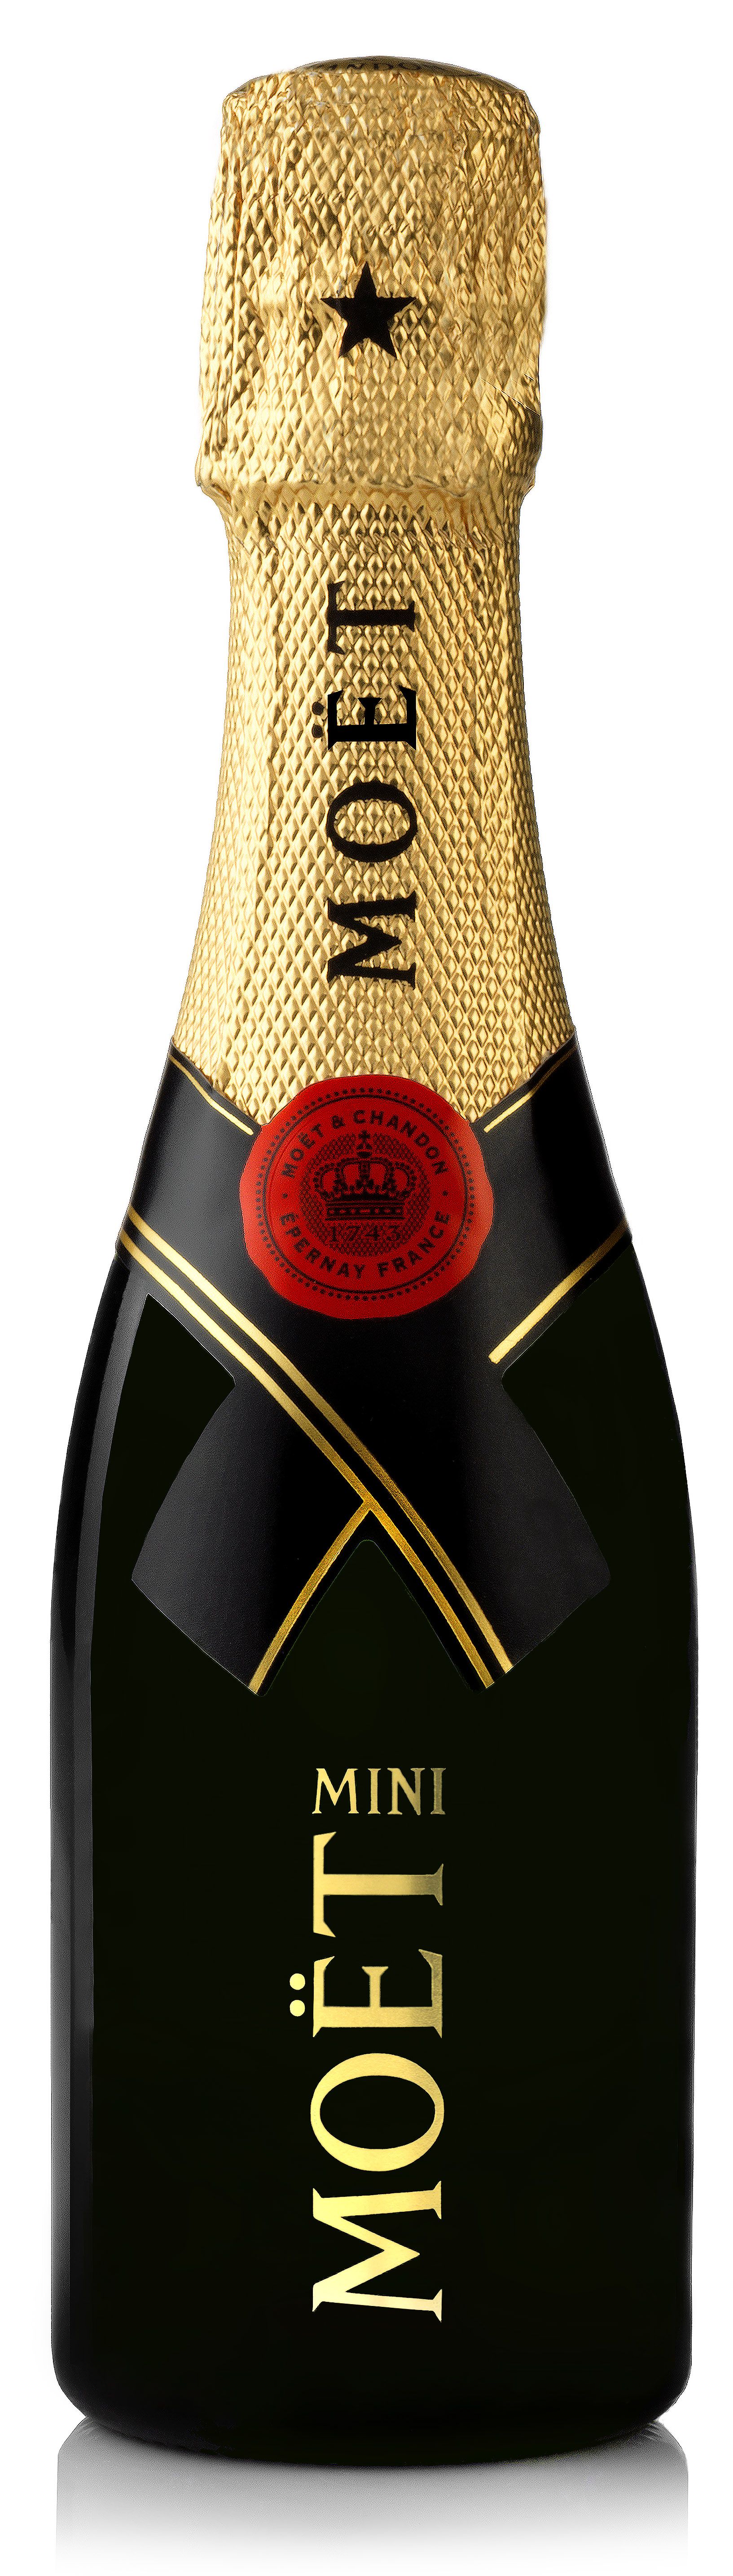 Champagne à Go‐Go: The Many Brands of Moet‐Hennessy - The New York